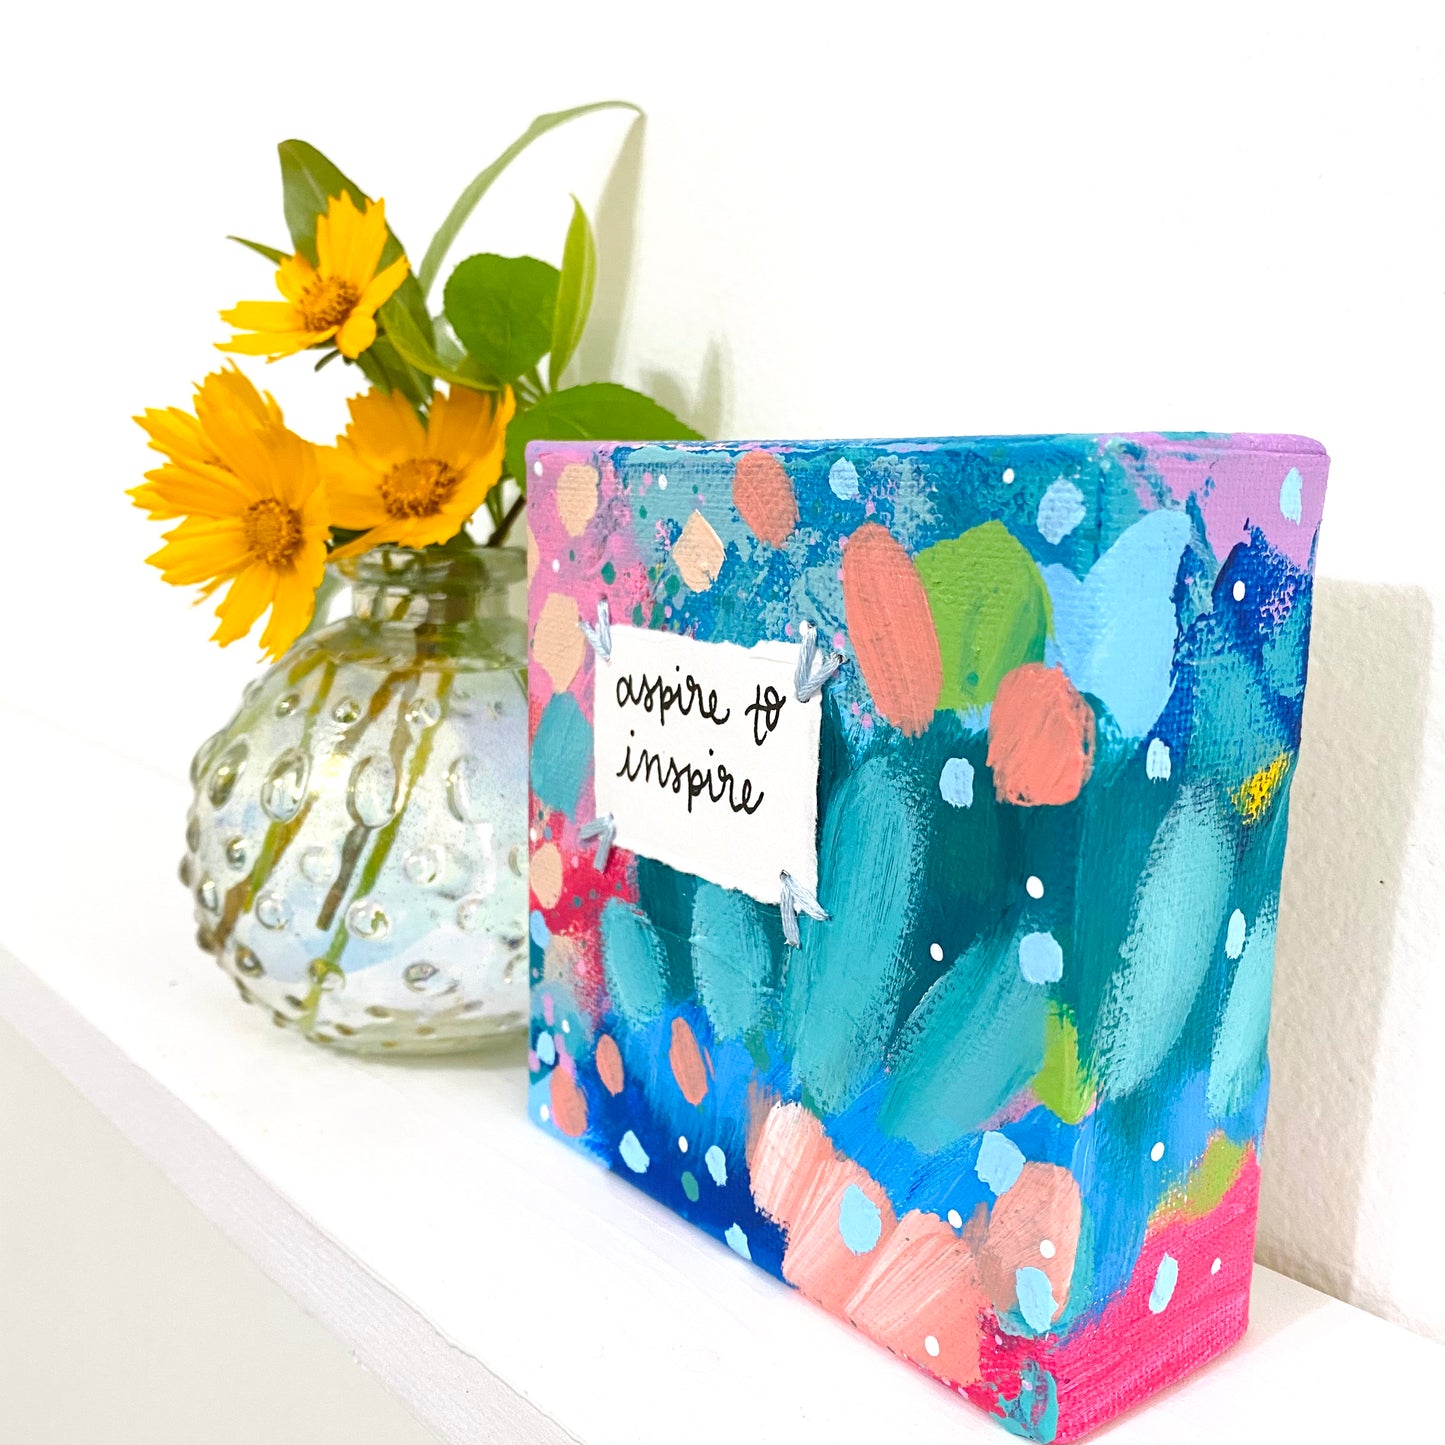 Aspire to Inspire 4x4 inch original abstract canvas with embroidery thread accents